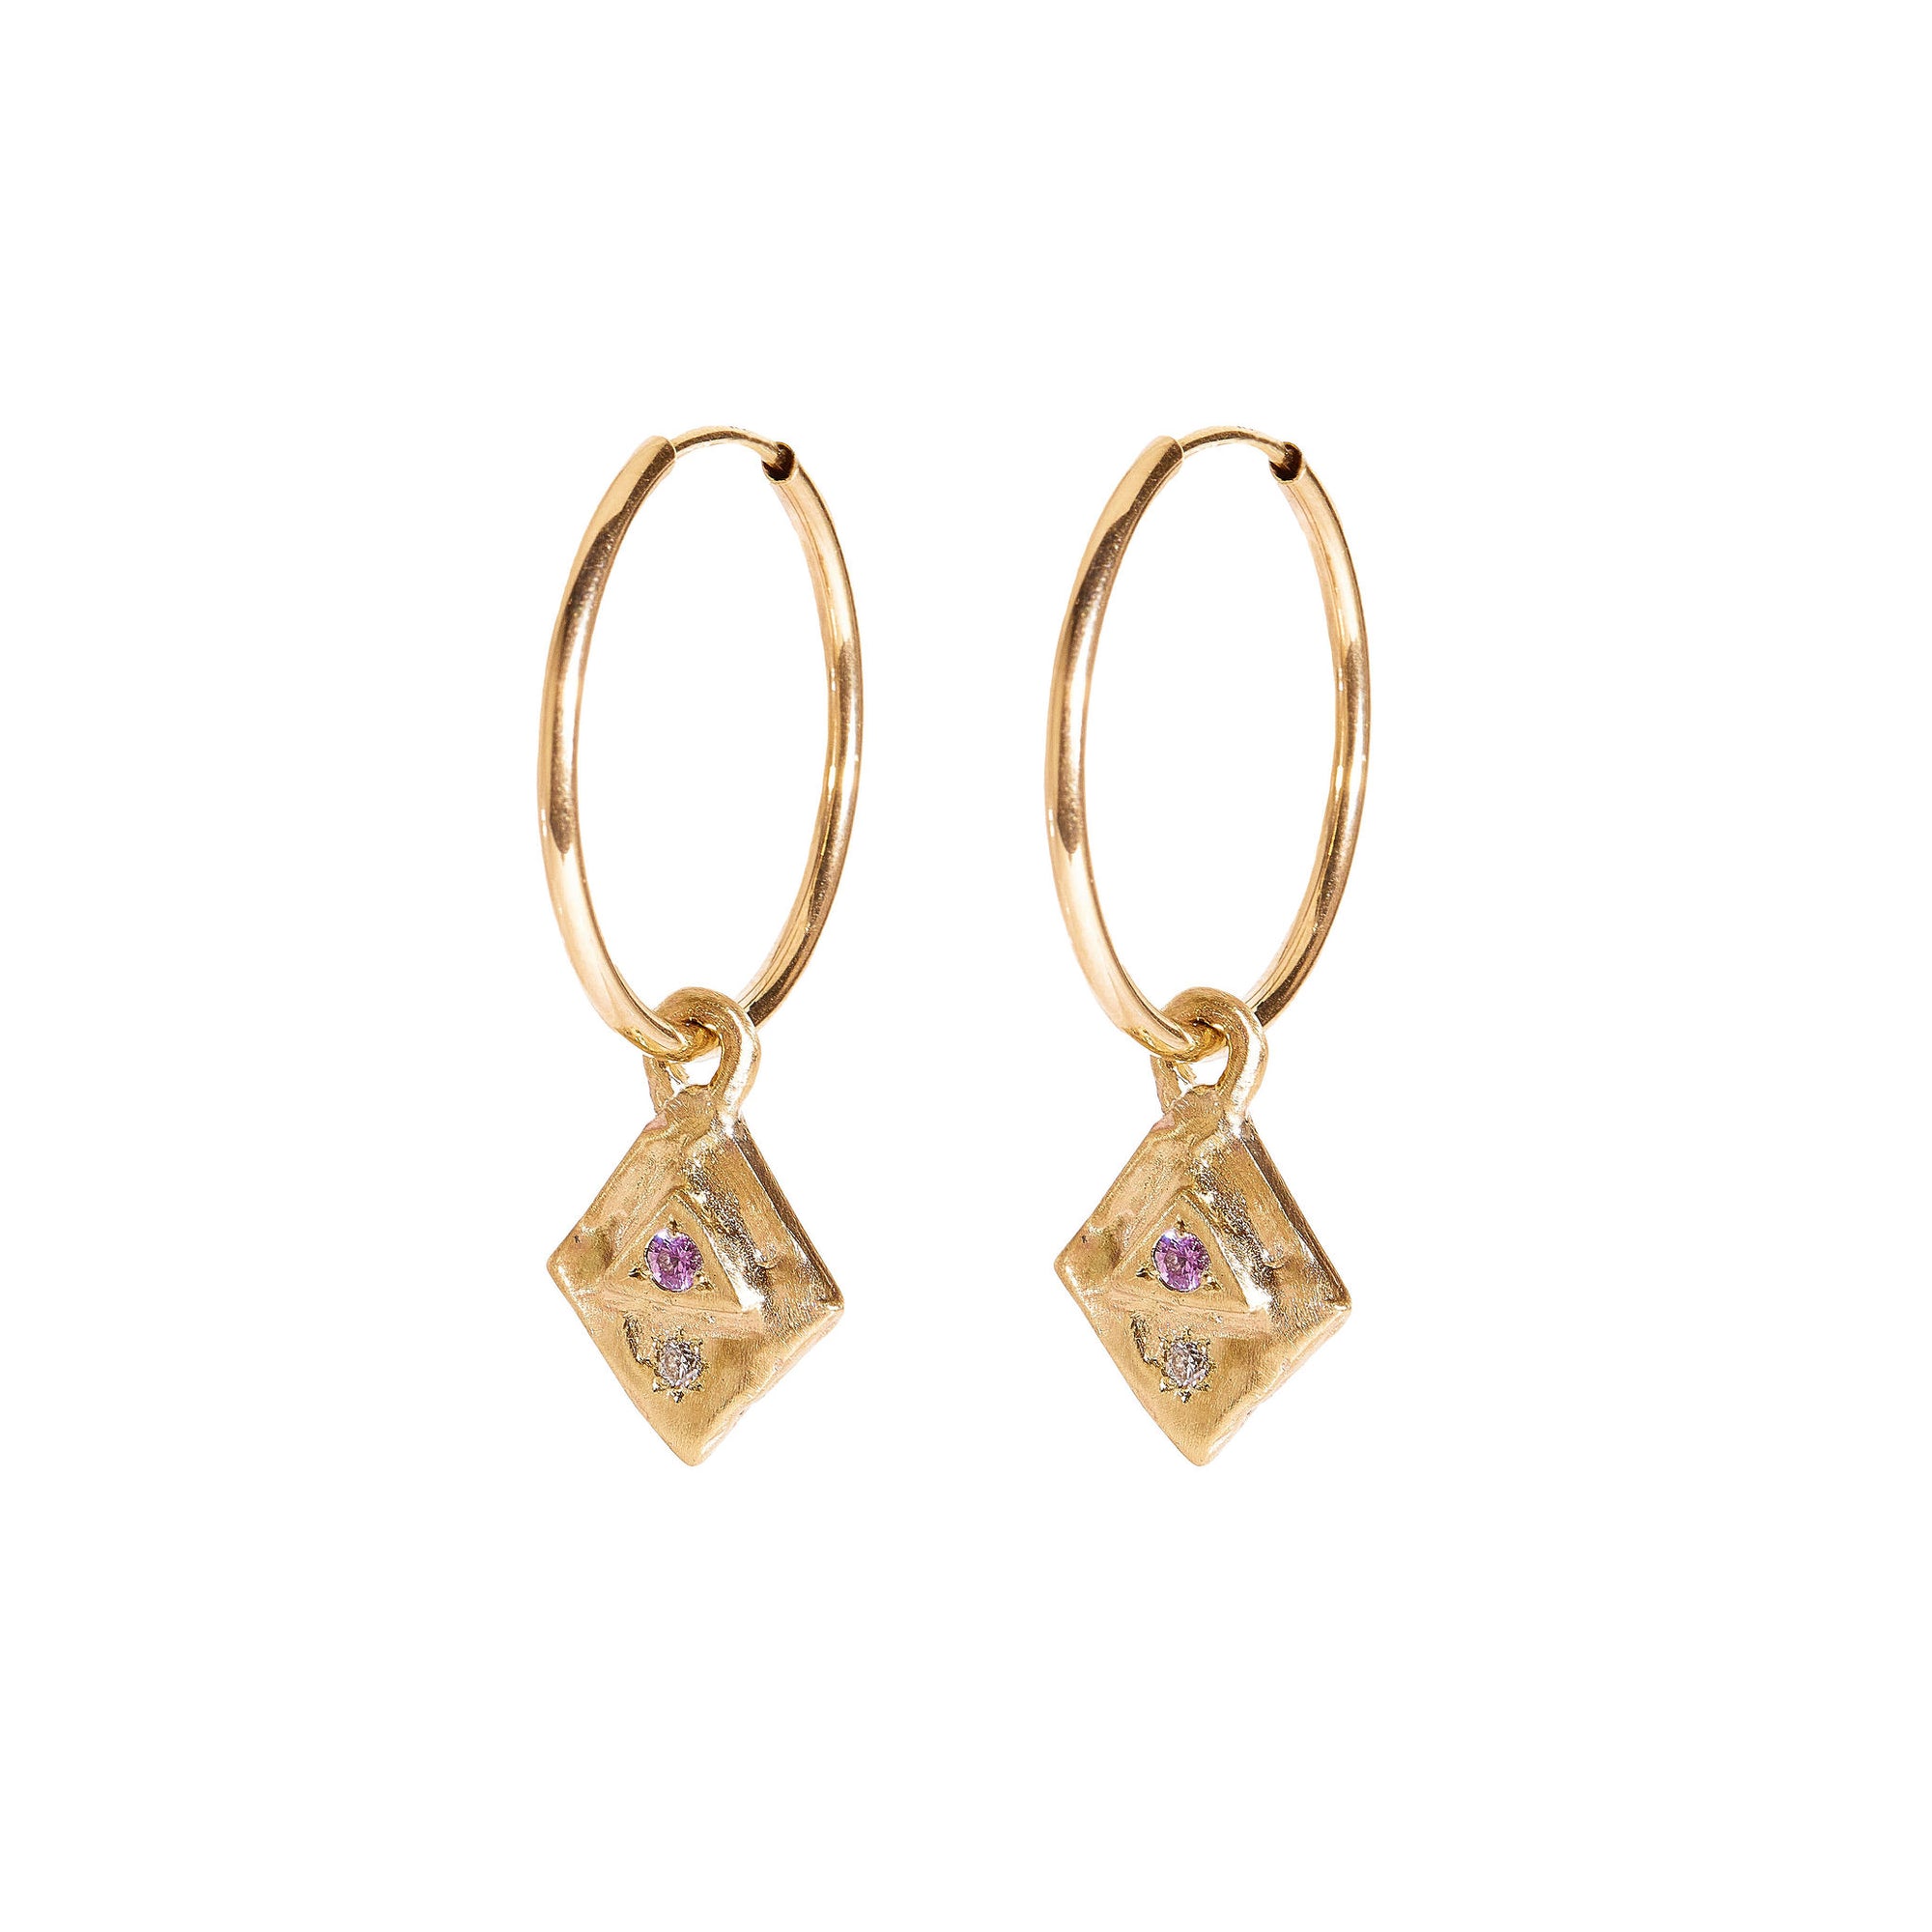  Pink Sapphire and Diamond Earrings in 9ct Yellow Gold 